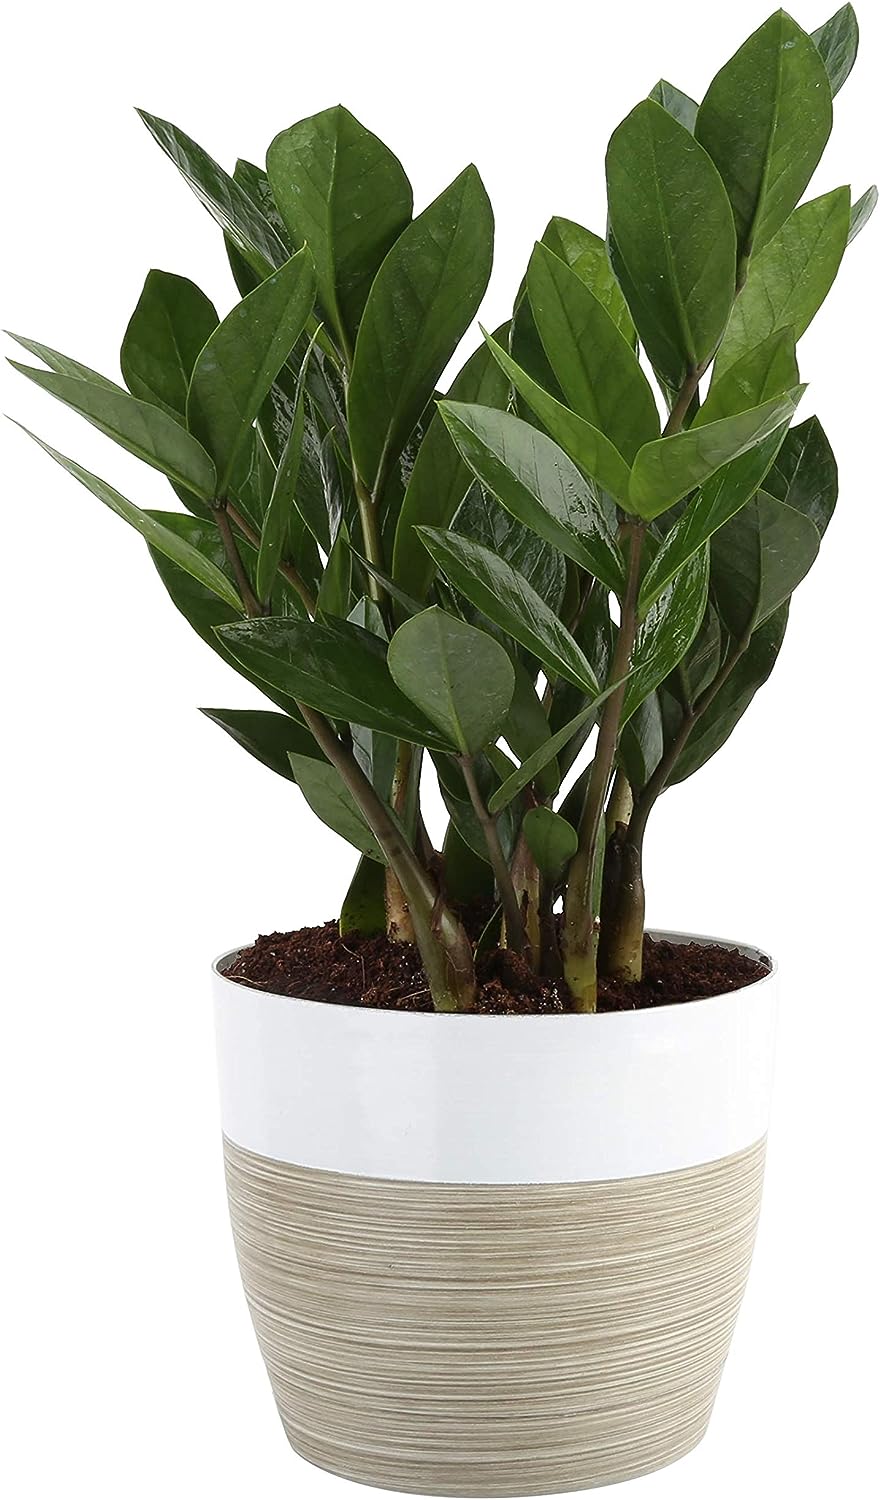 Houseplants That Thrive In Low Light Conditions That Will Transform